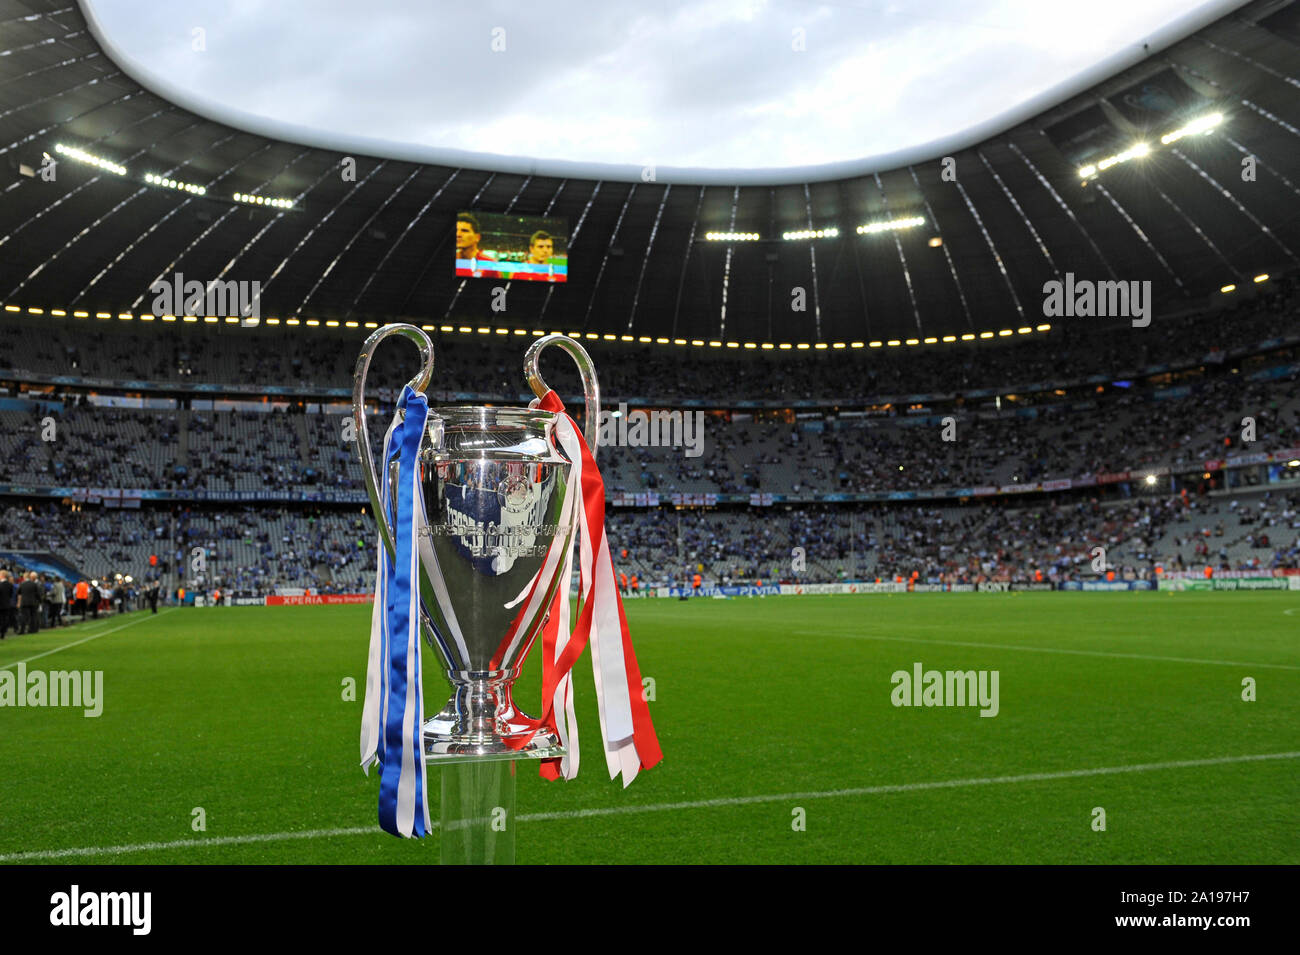 Munich, Deutschland. 25th Sep, 2019. Official: Champions League Final 2022  in the Allianz Arena. Archive photo; Cup, trophy, subject shot in the  stadium. Football Champions League Final 2012/Bayern Munich-Chelsea FC.  Season2011/12, FOOTBALLARENAMUENCHEN,